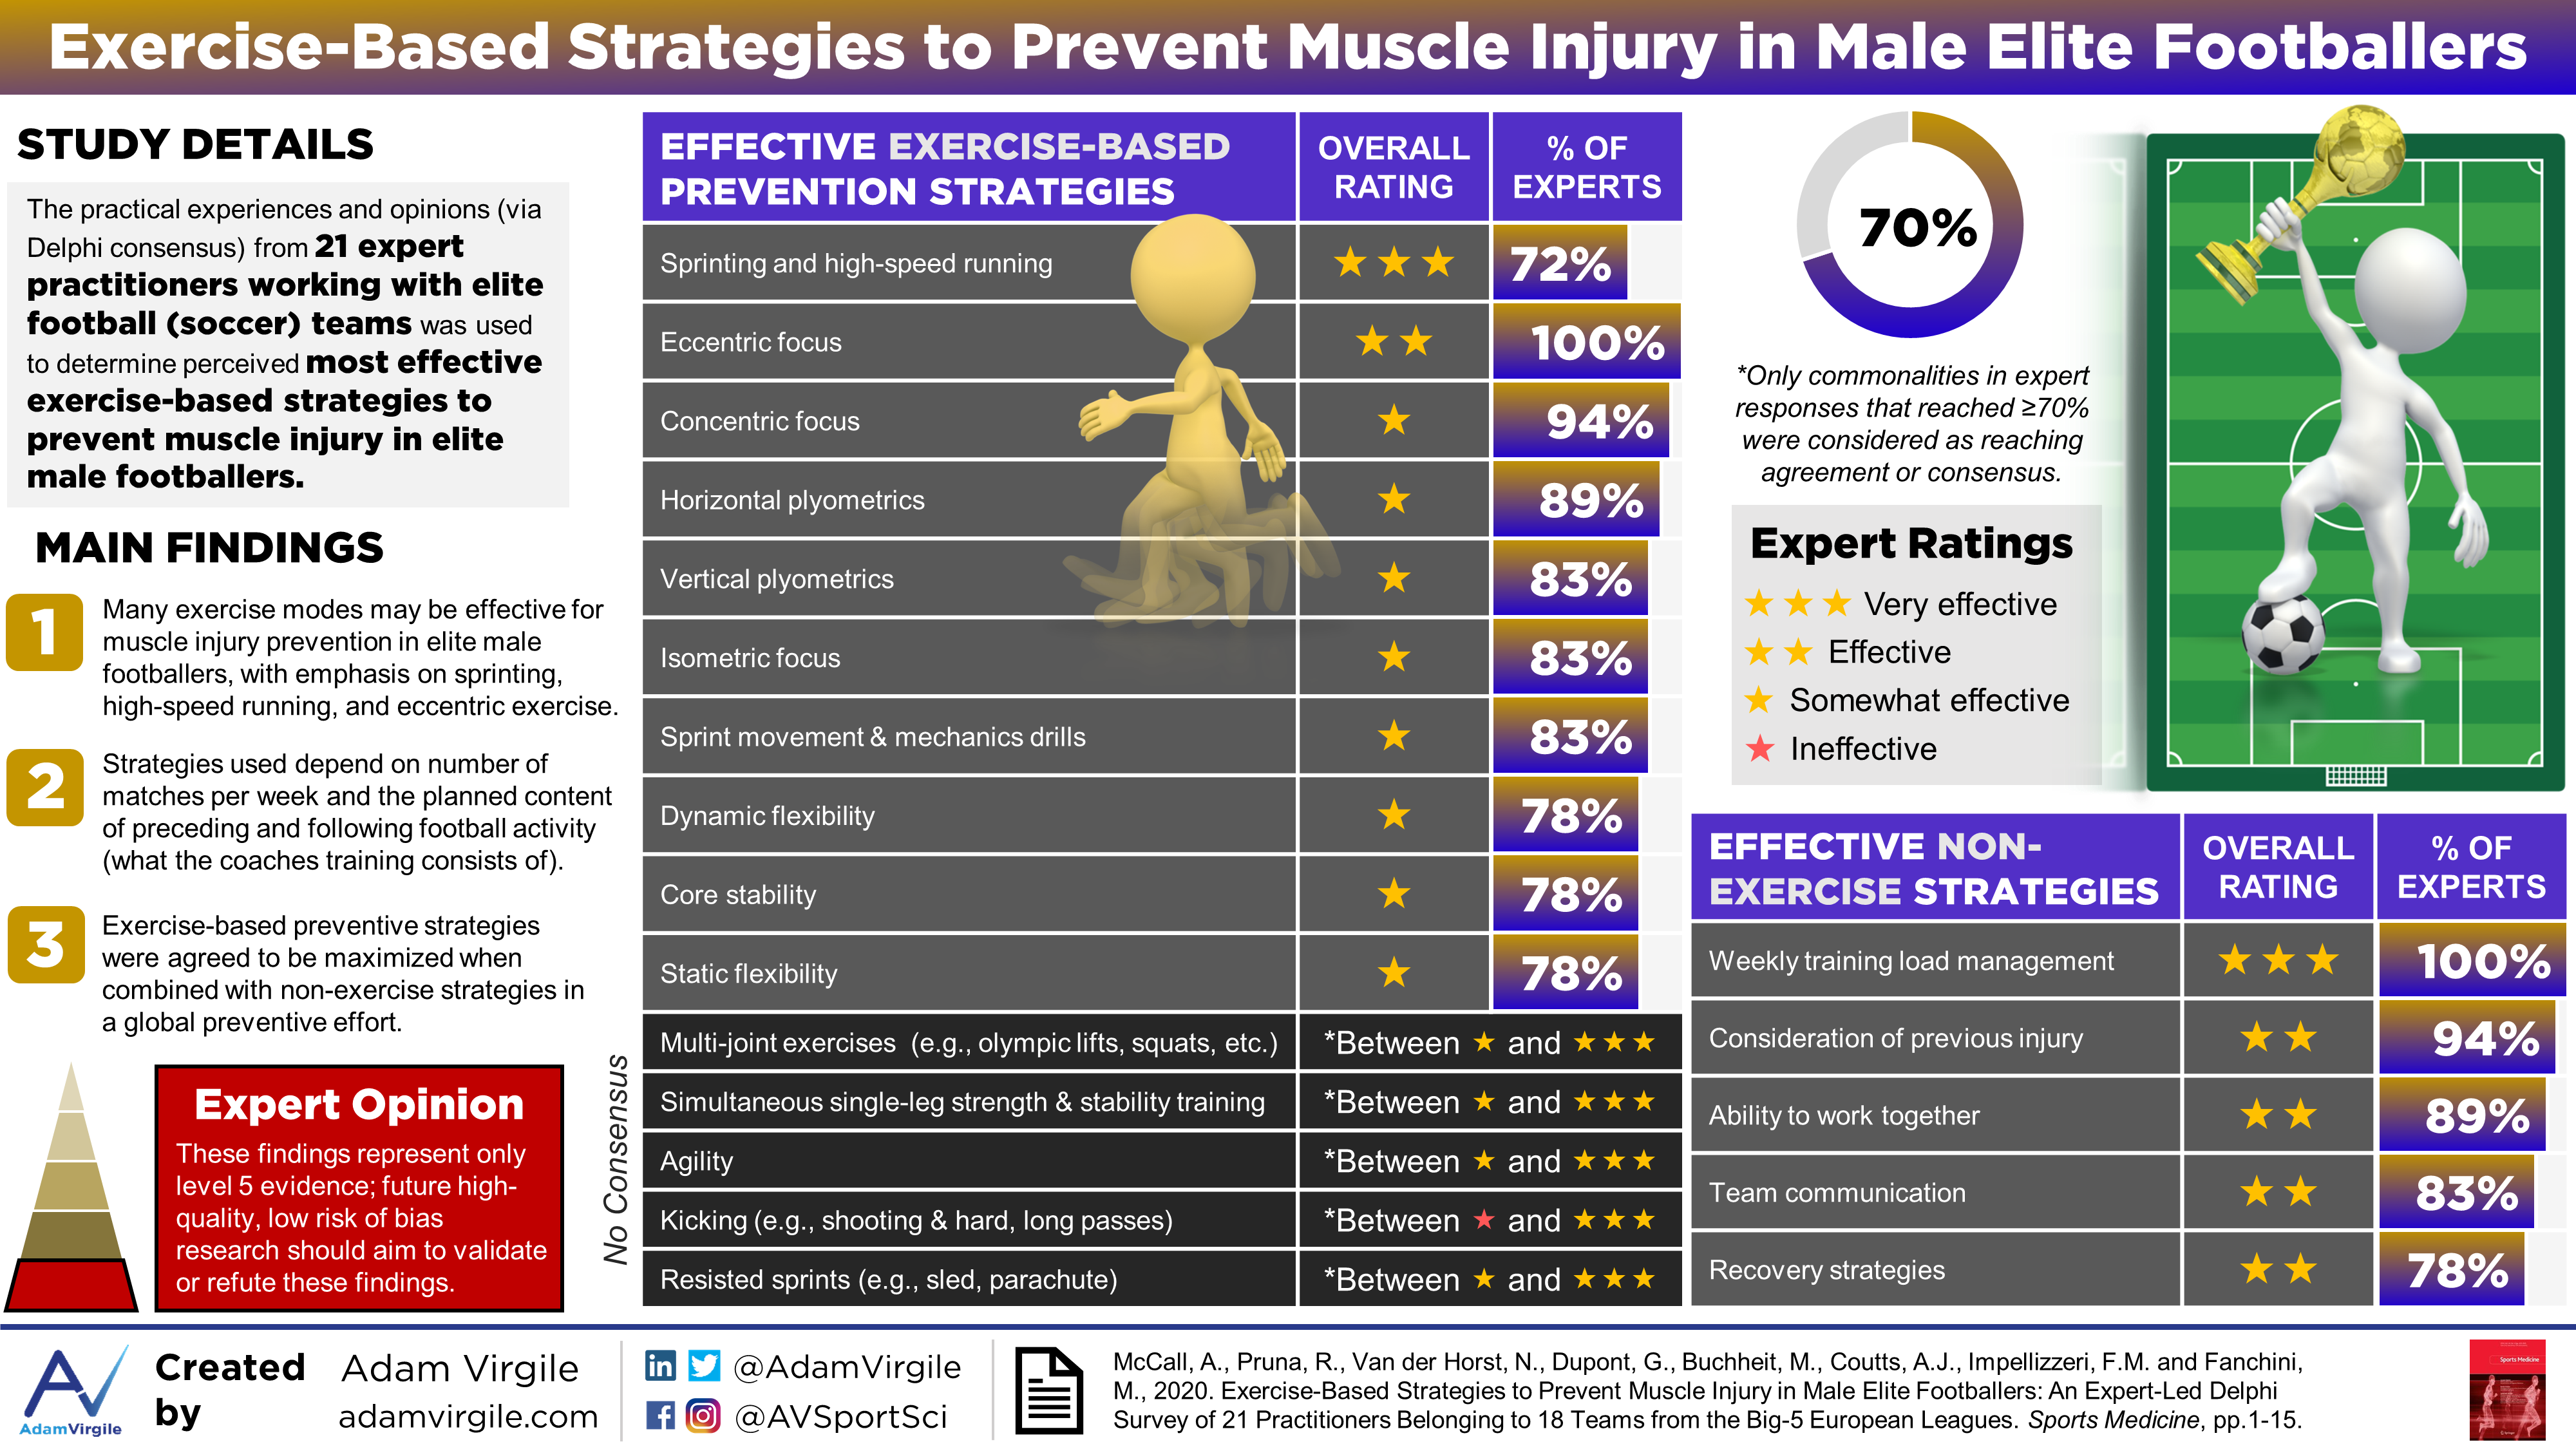 You are currently viewing Exercise-Based Strategies to Prevent Muscle Injury in Male Elite Footballers: An Expert-Led Delphi Survey of 21 Practitioners Belonging to 18 Teams from the Big-5 European Leagues